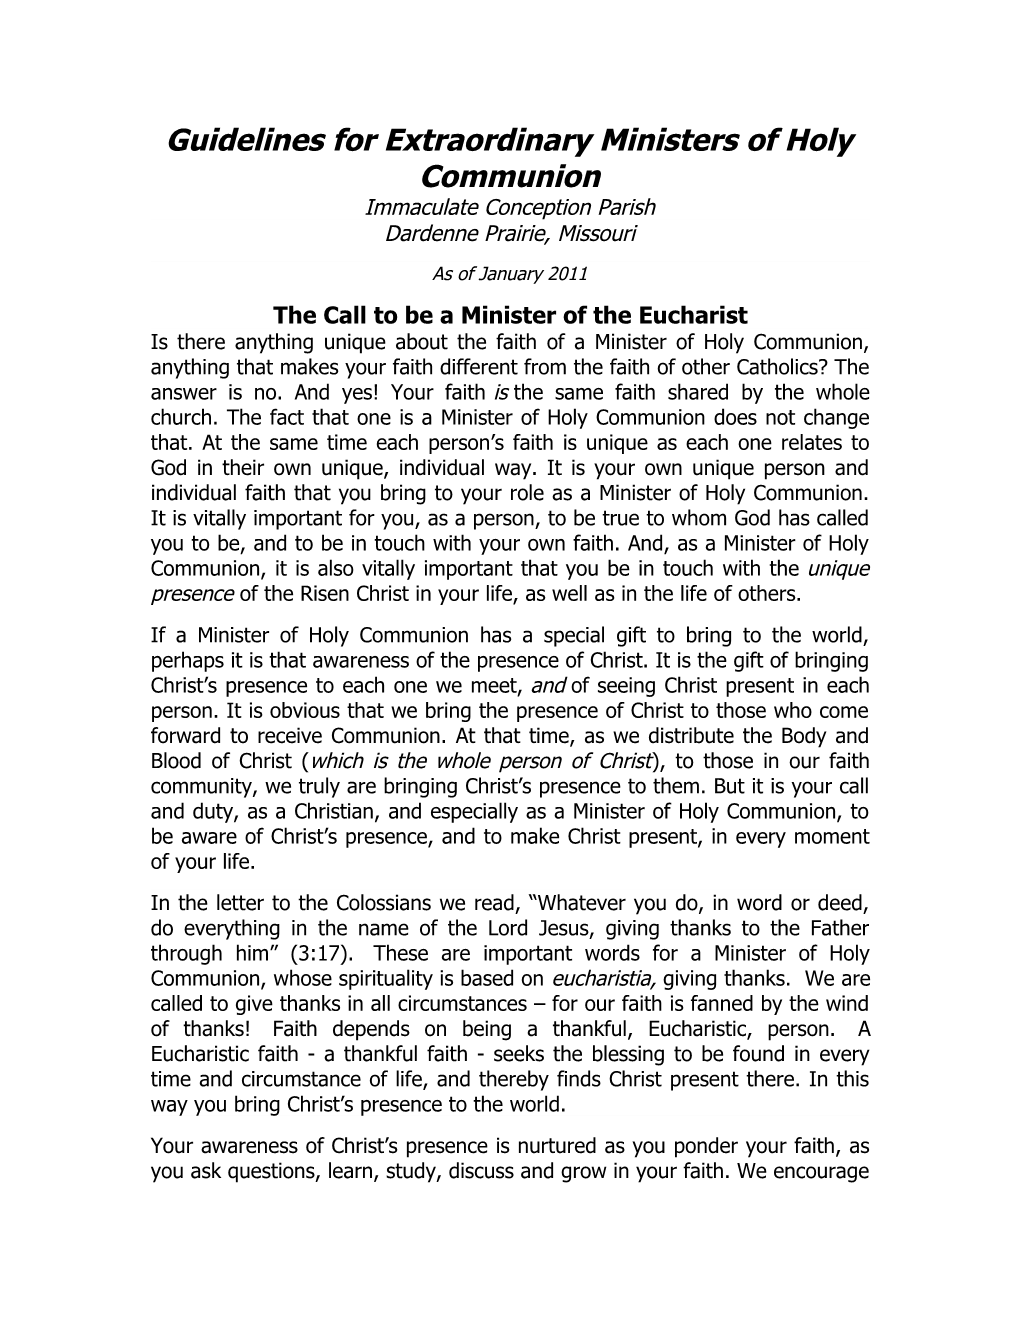 Guidelines for Extraordinary Ministers of Holy Communion